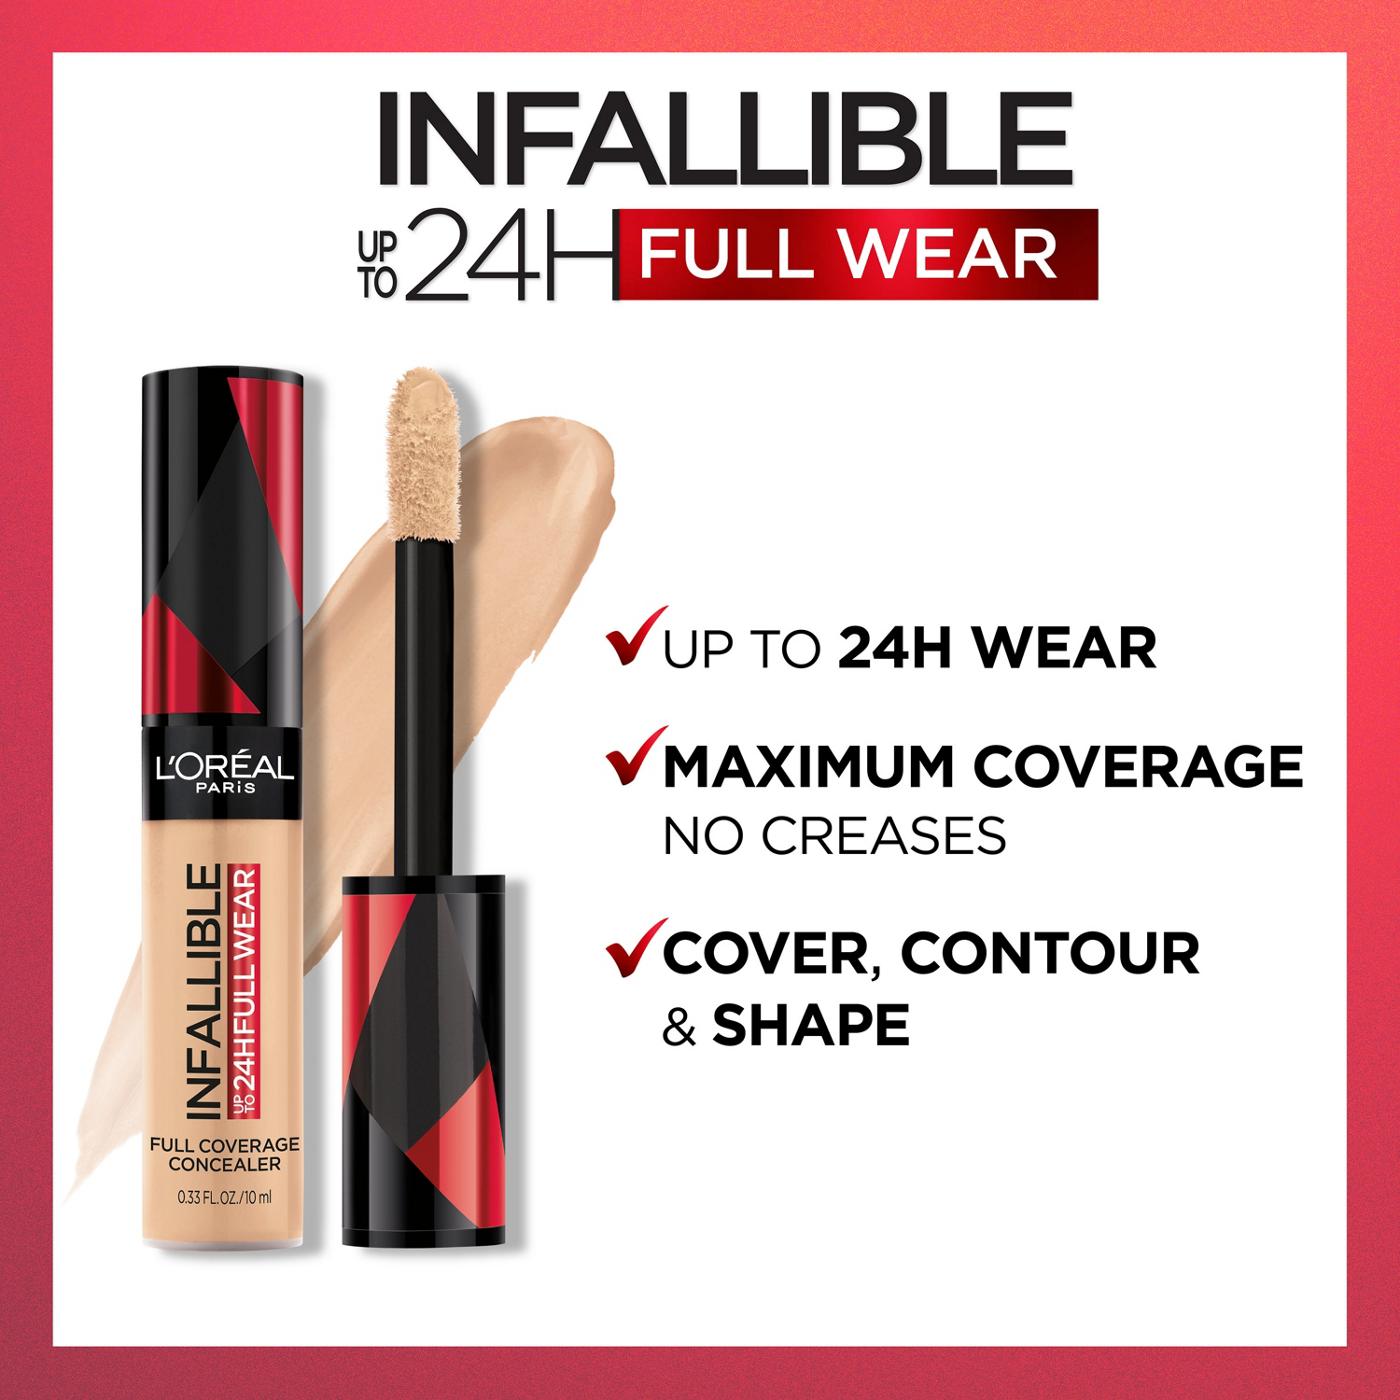 L'Oréal Paris Infallible Full Wear Concealer up to 24H Full Coverage Toffee; image 4 of 8